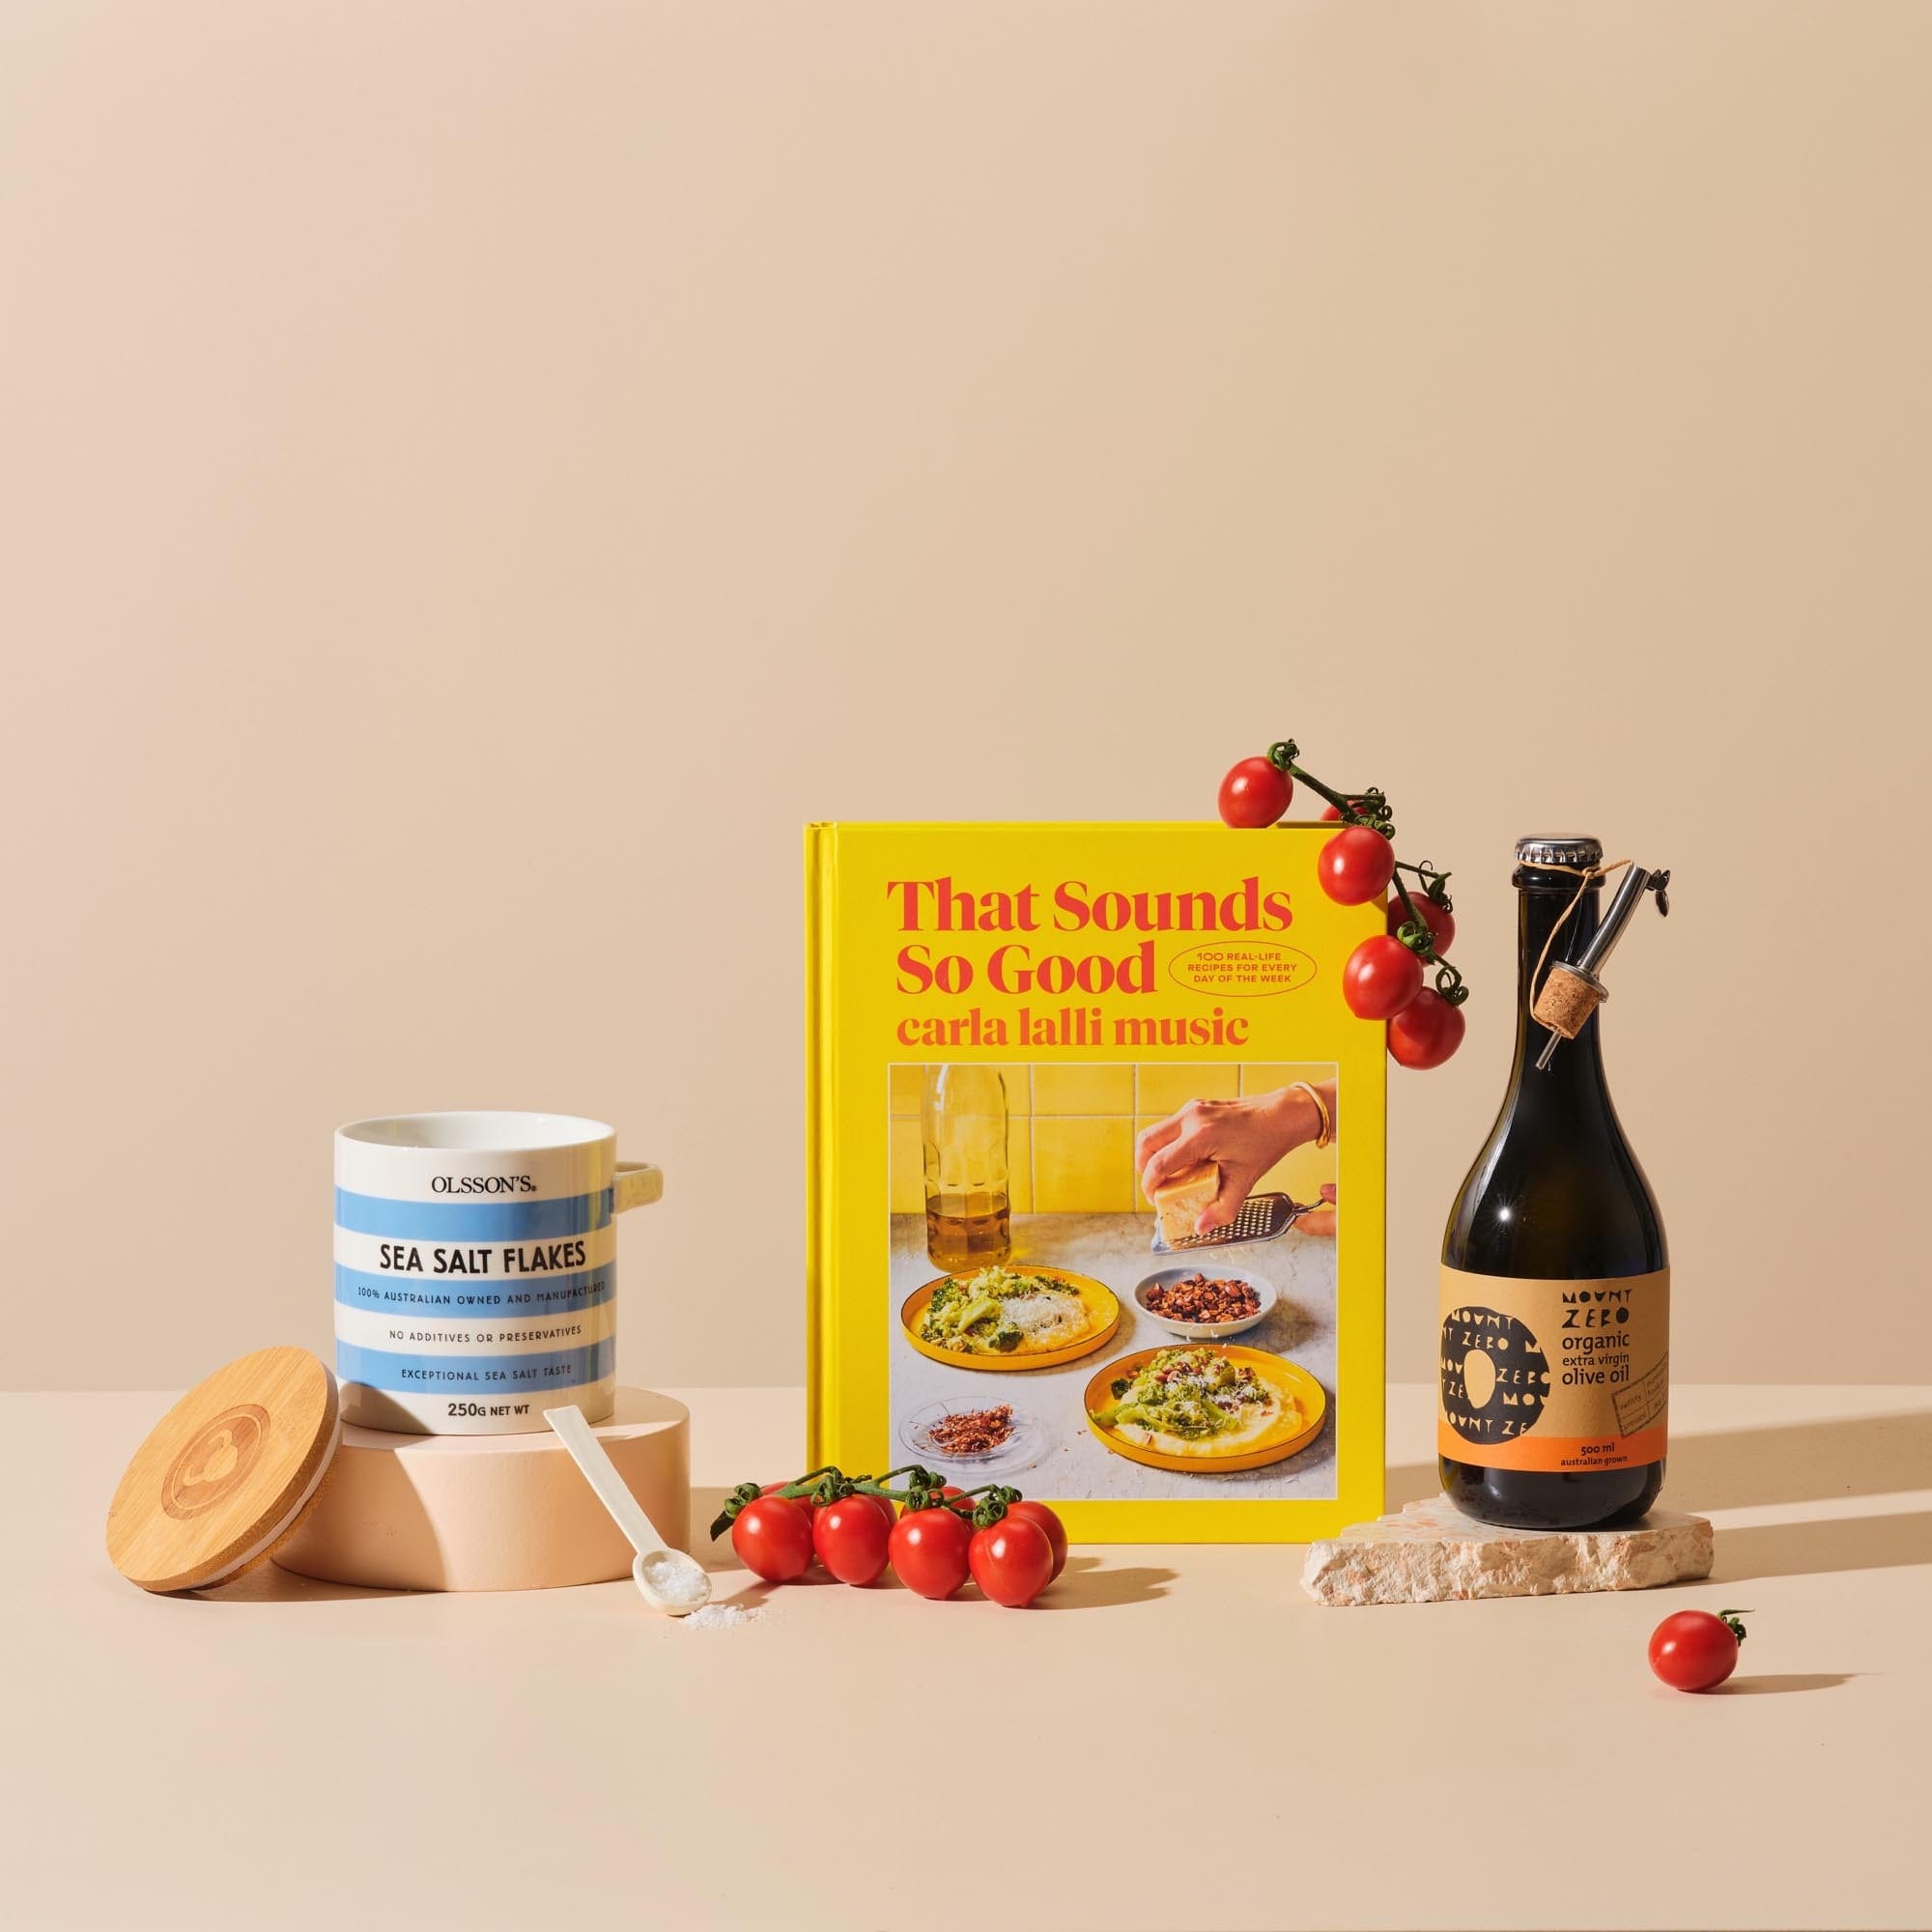 This is the Larder Love gift bundle from Handsel. Included in this image is That Sounds So Good, Olive oil and Sea salt flakes